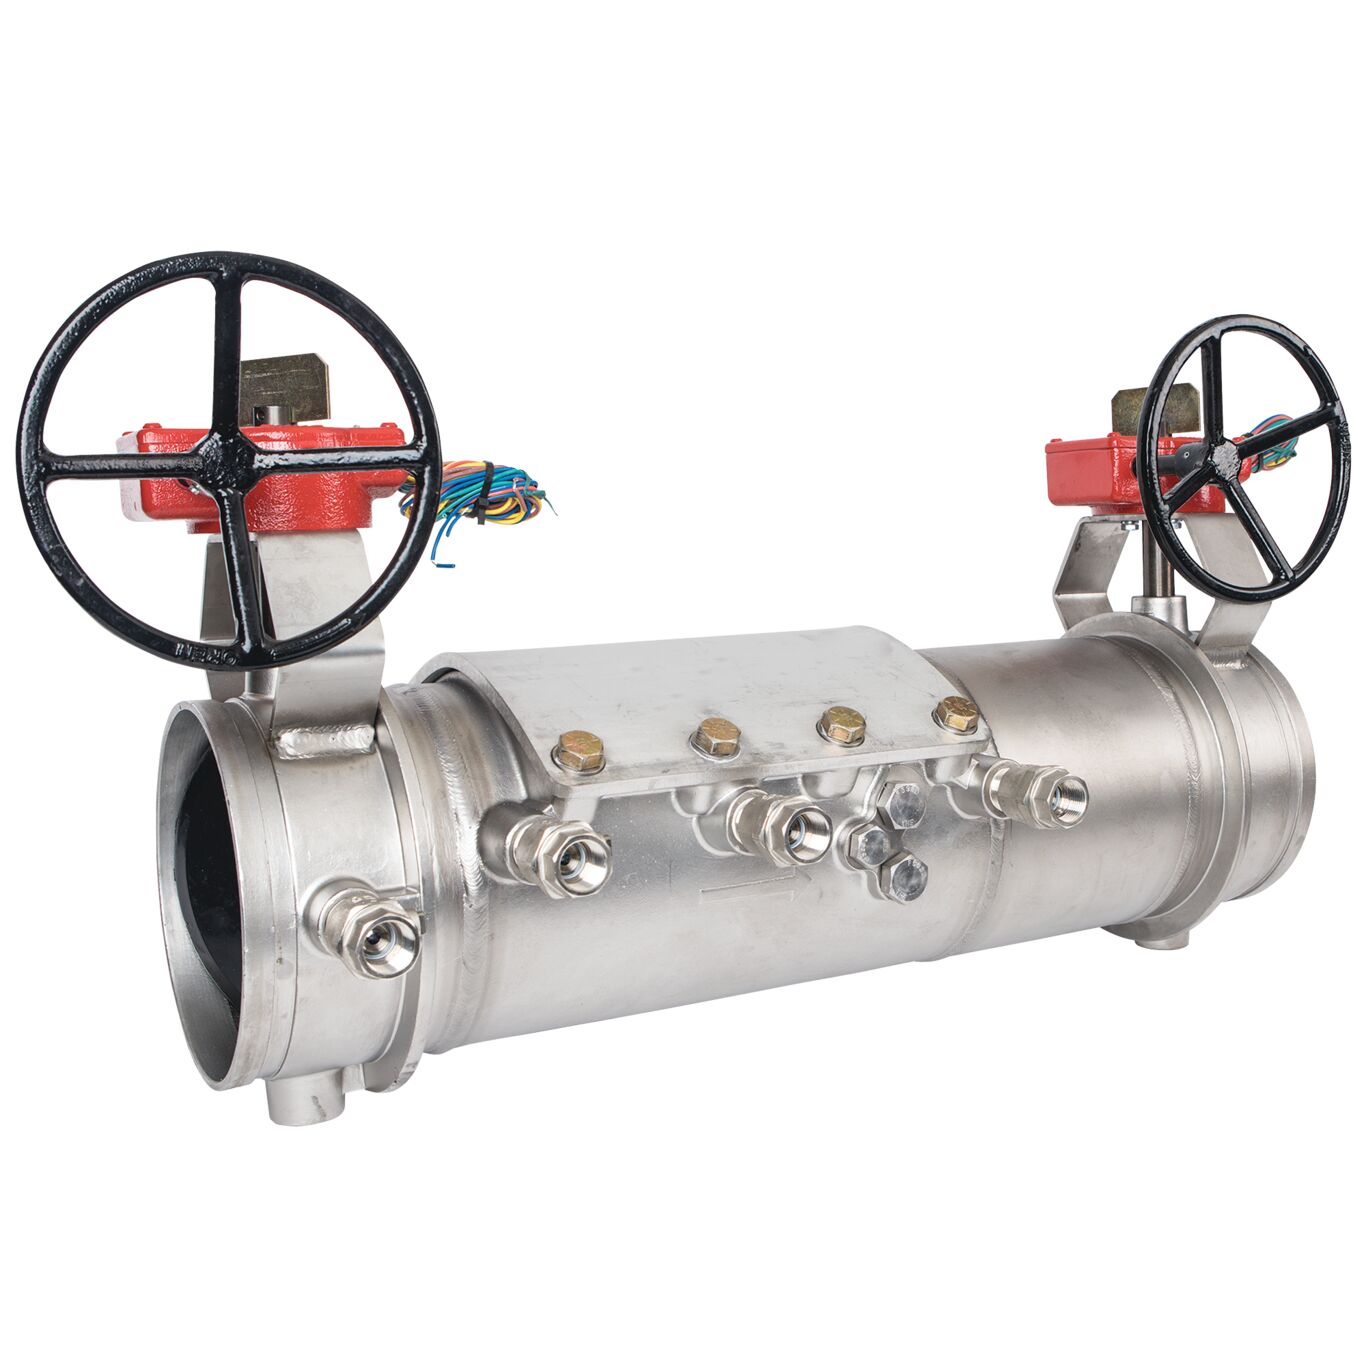 Deringer 20GX Double Check Backflow Preventer with OS&Y Gate Valves